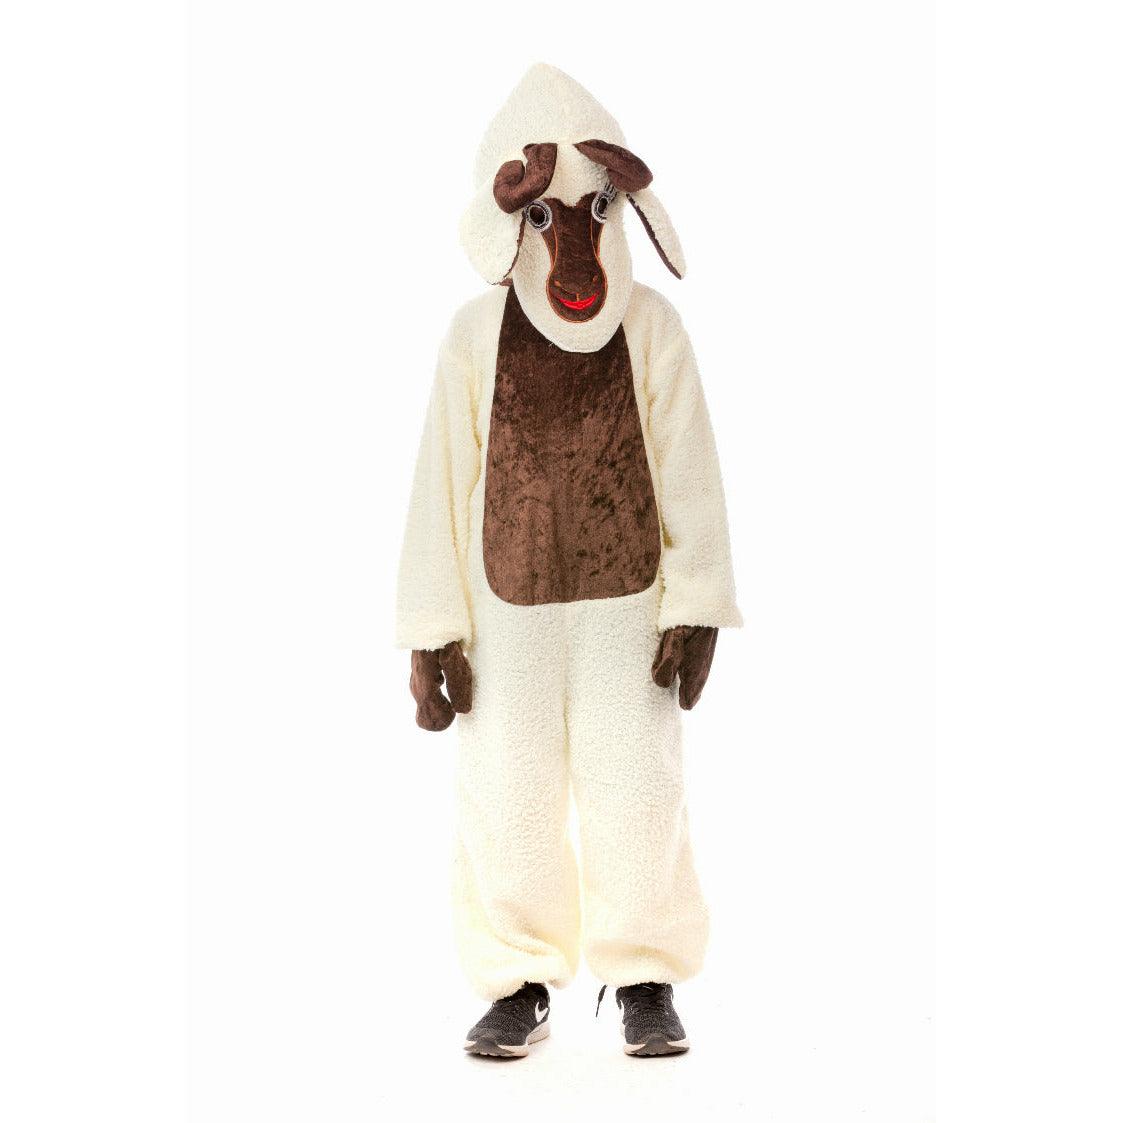 Sheep Costume - Ourkids - M&A